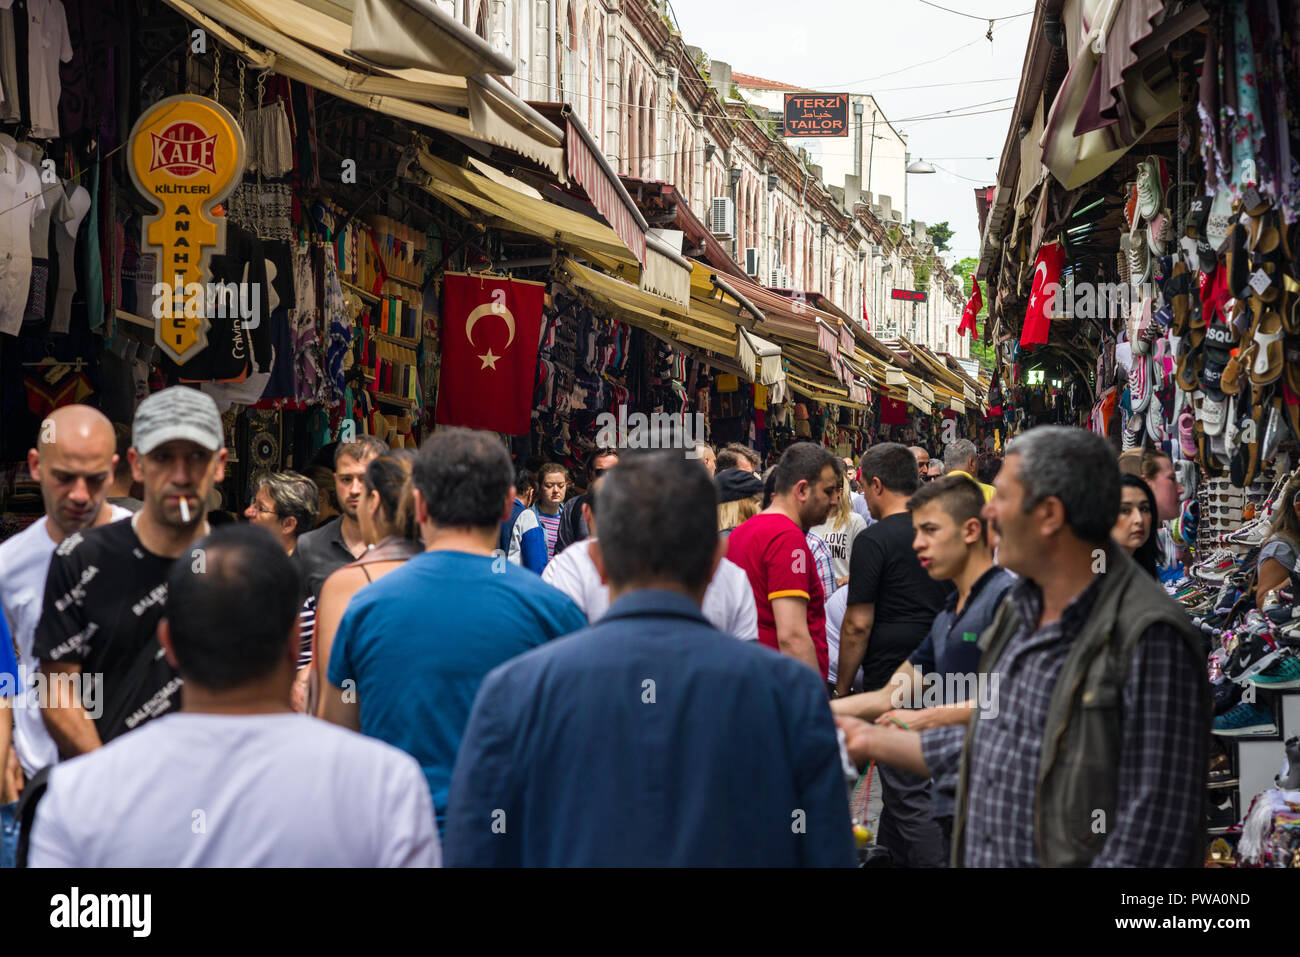 People walking down a narrow cobbled street past small shops, Istanbul, Turkey Stock Photo